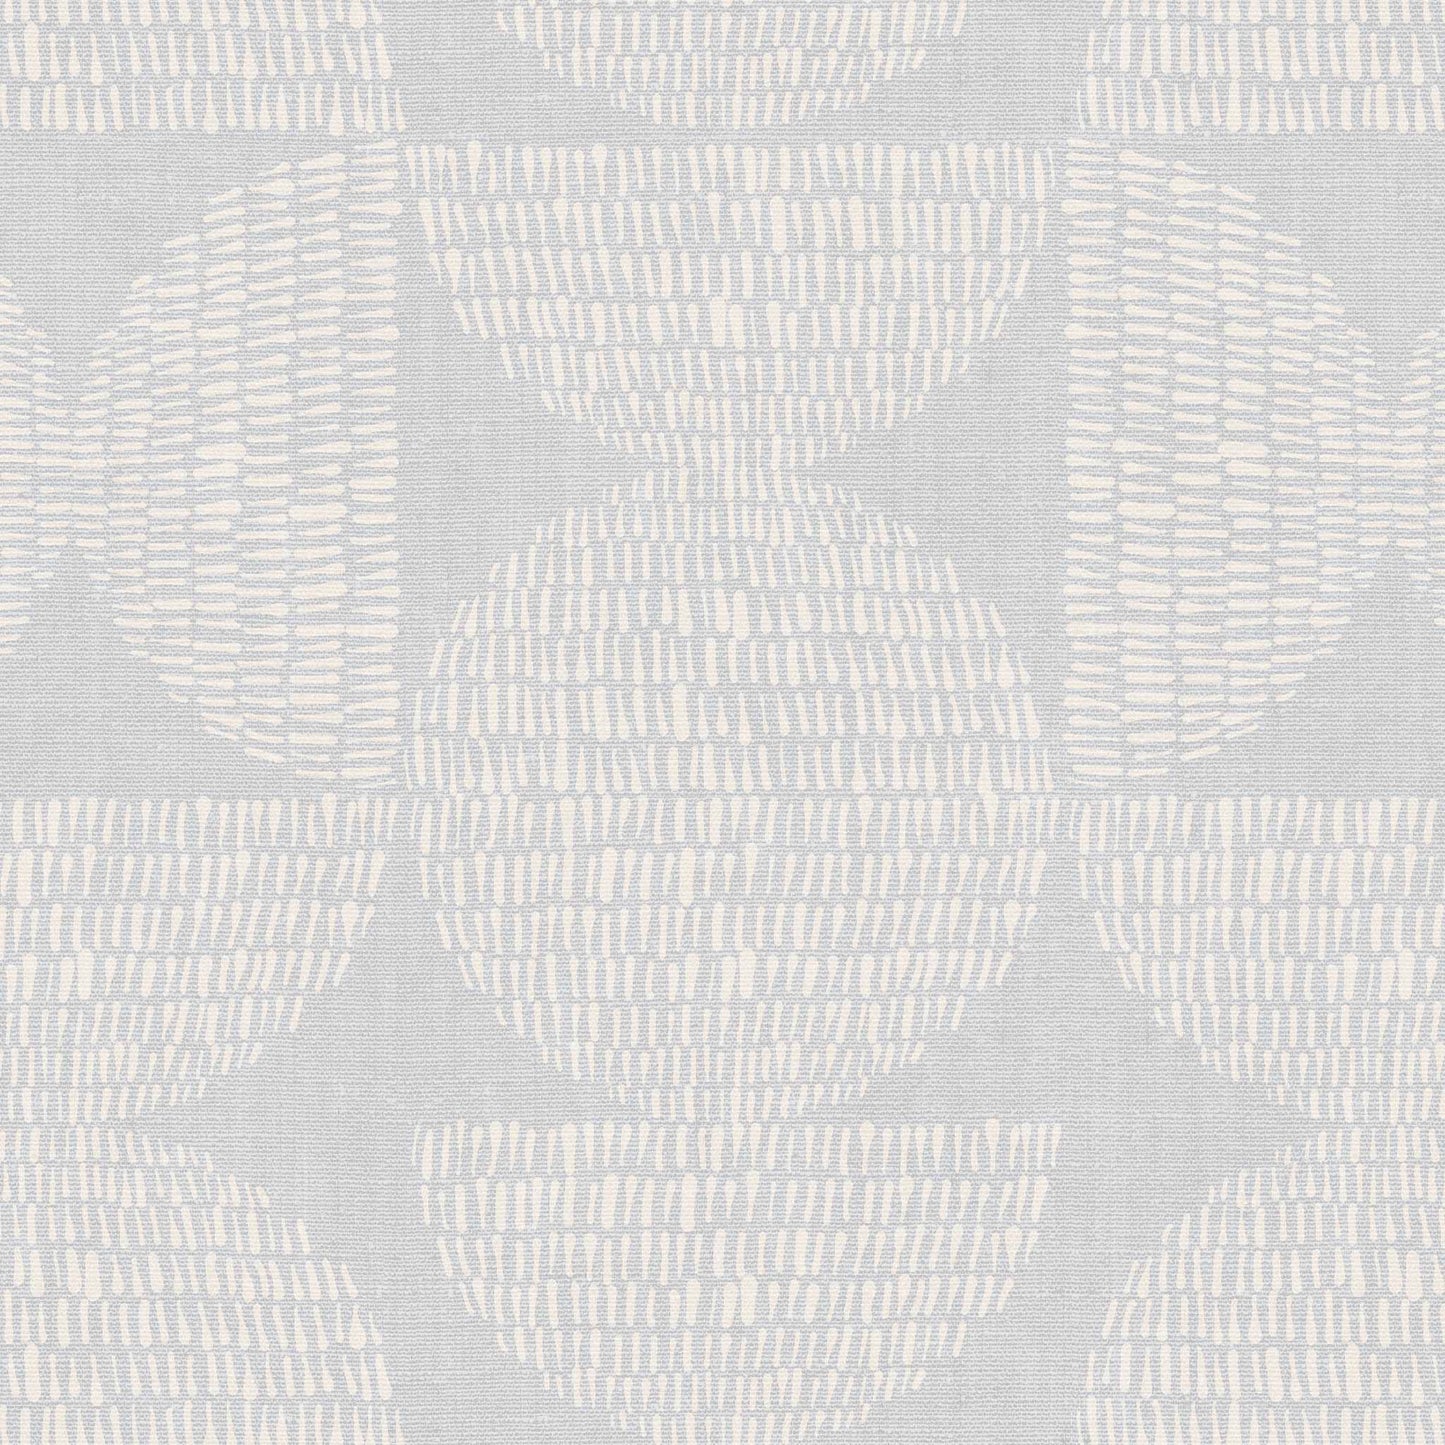 Go crazy with circles! Get yourself these stylish Half Circle Blocks Wallpapers for a unique wall decor solution. With its pale blue design, these geometric wallpapers will easily liven up any room, making it look modern and chic.